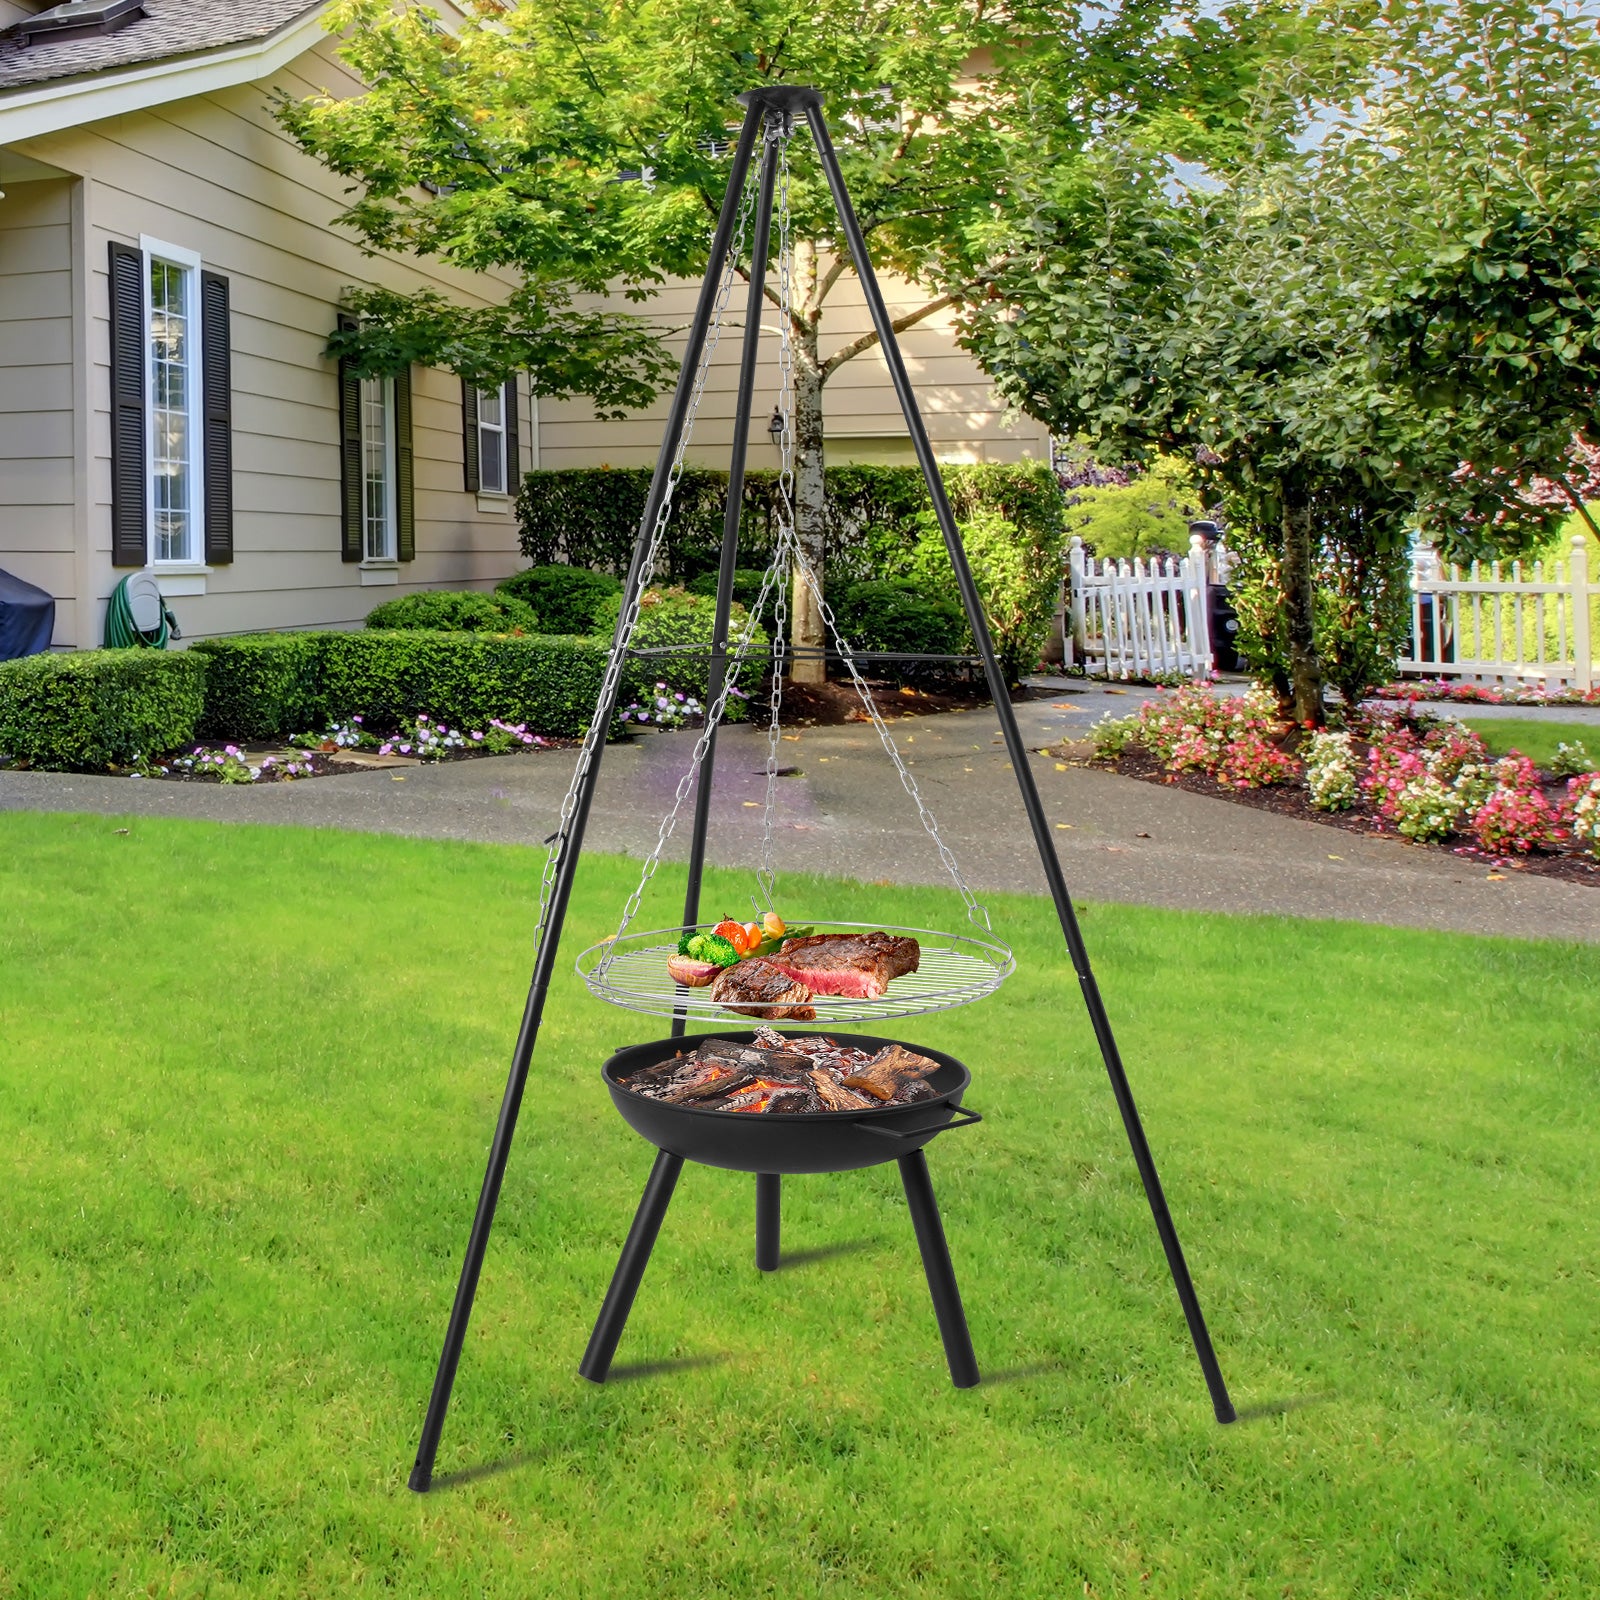 (Out of Stock) Outdoor Height Adjustable Wood Burning Fire Pit Tripod Cooking Grill with Round Grill Grate